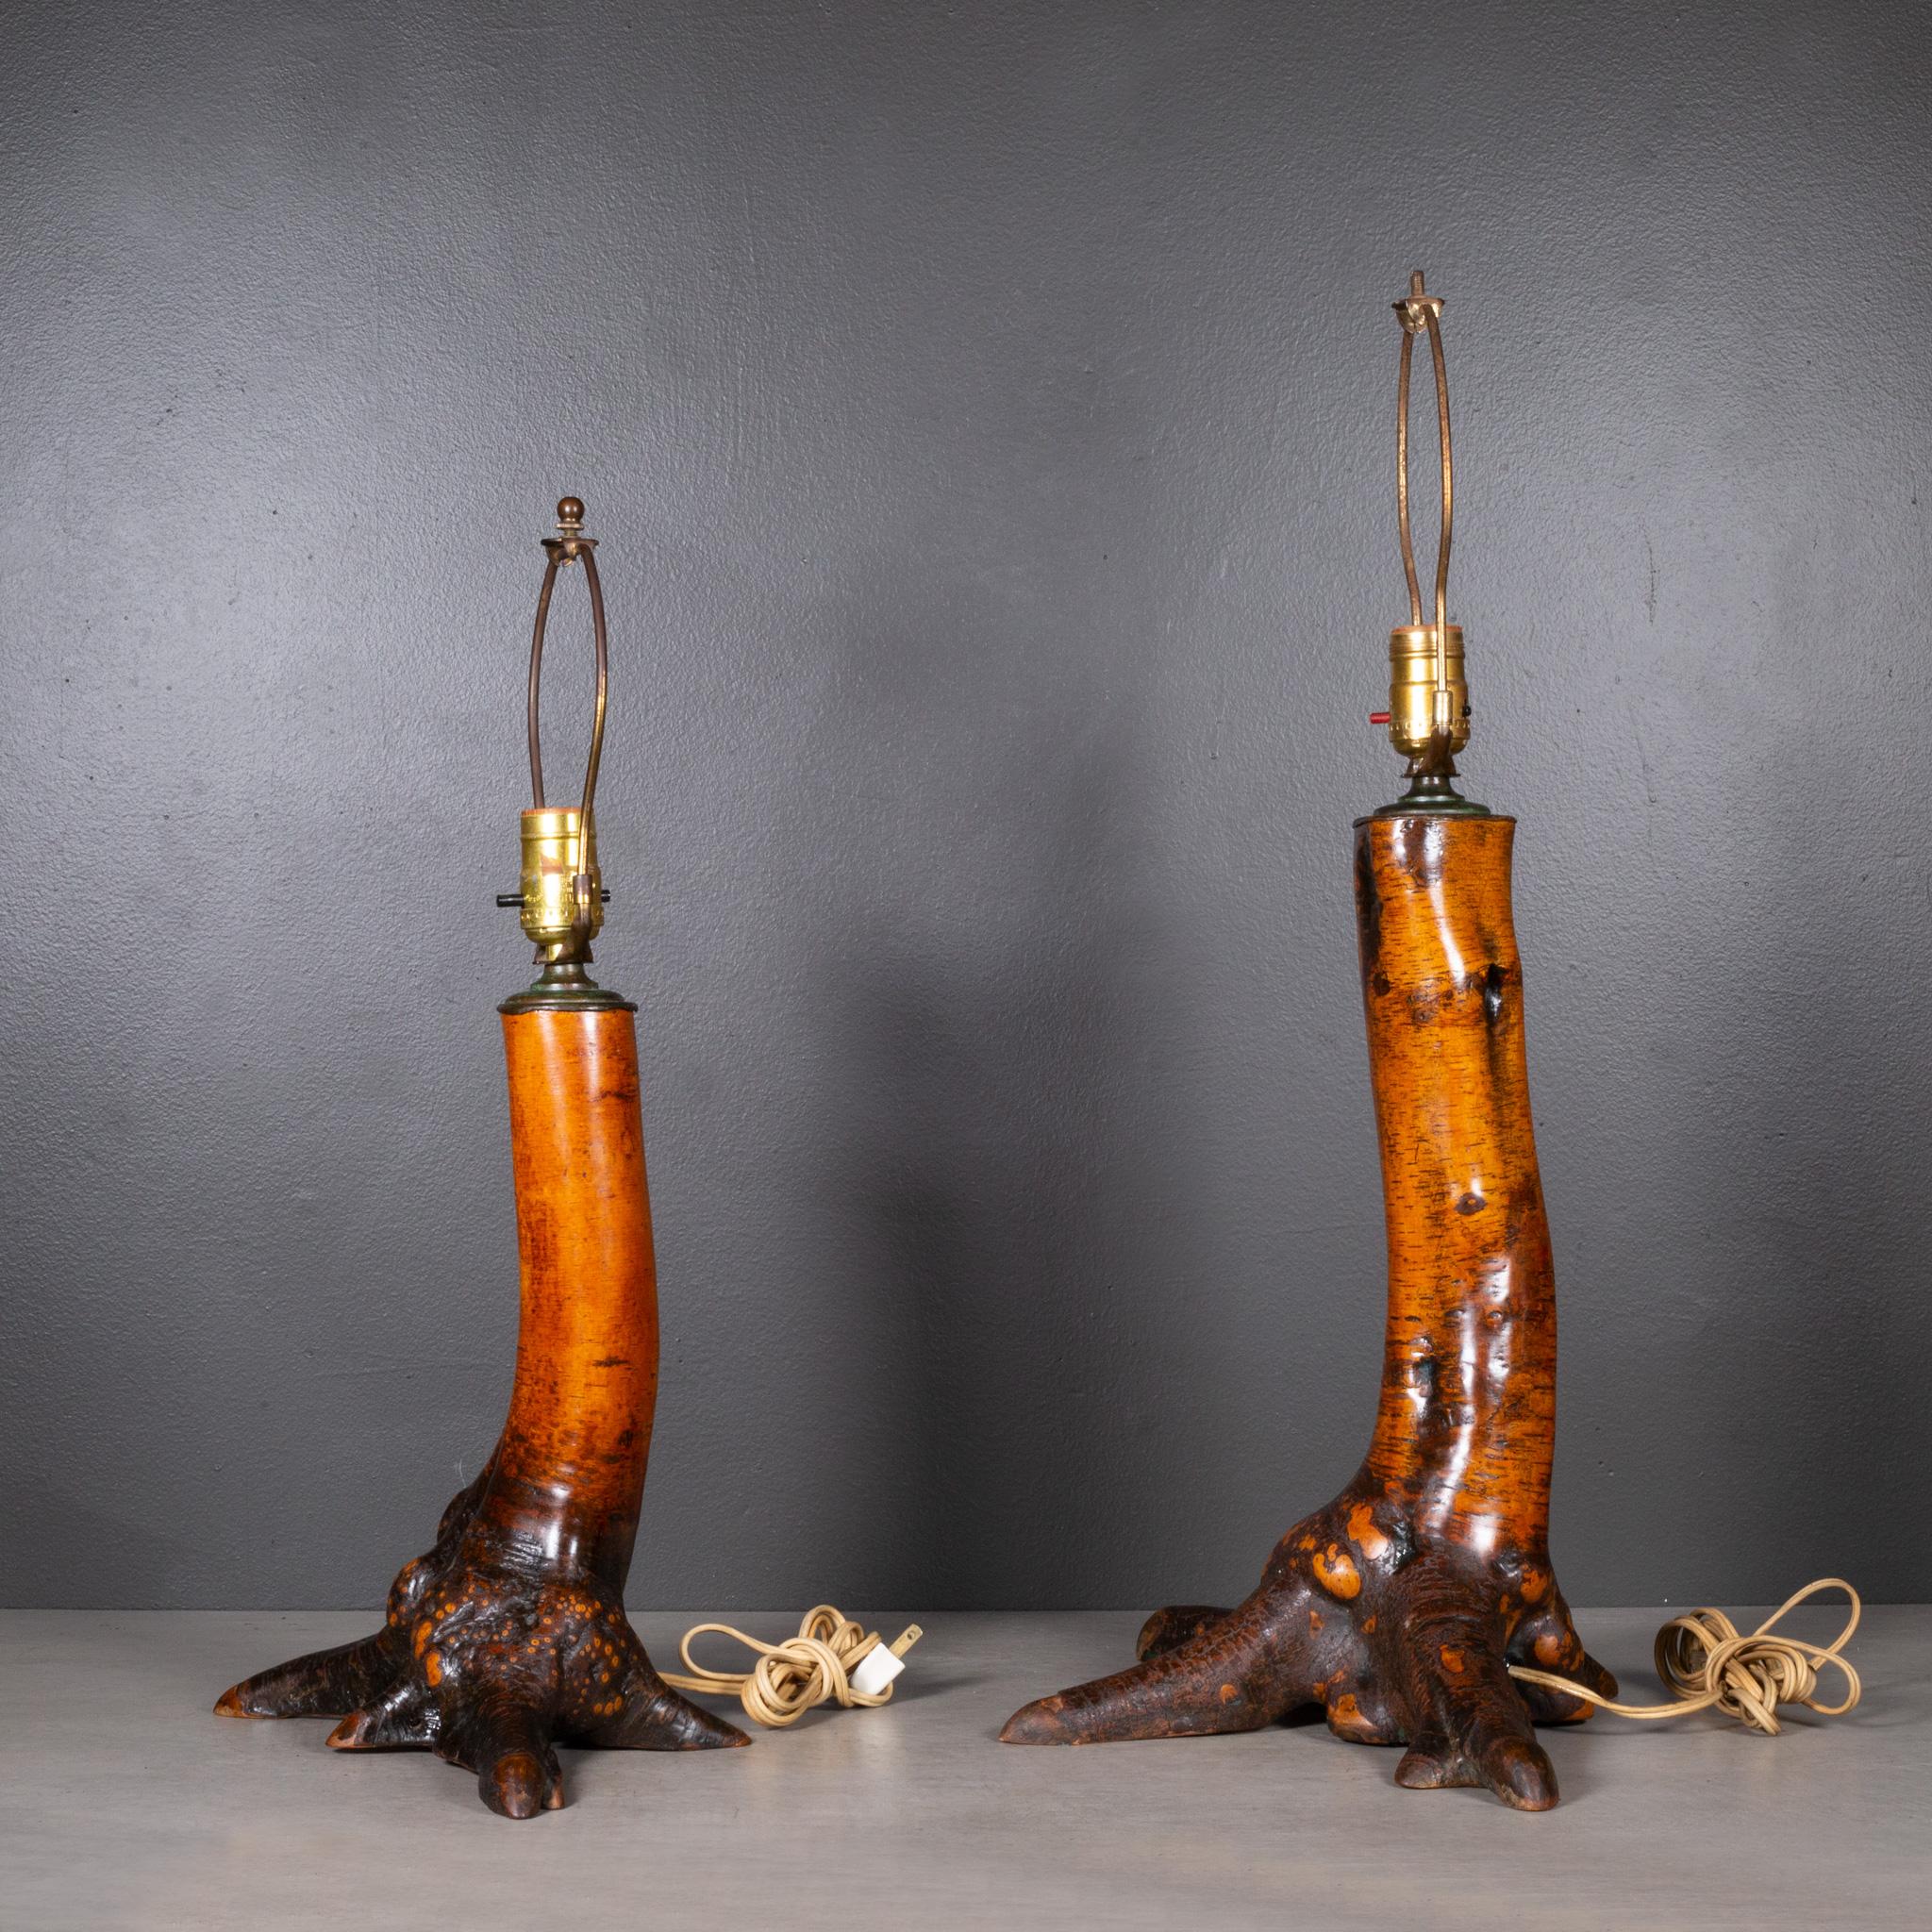 Industrial Early 20th c. Birch Trunk Lamps with Bronze Collars c.1920-1940 For Sale